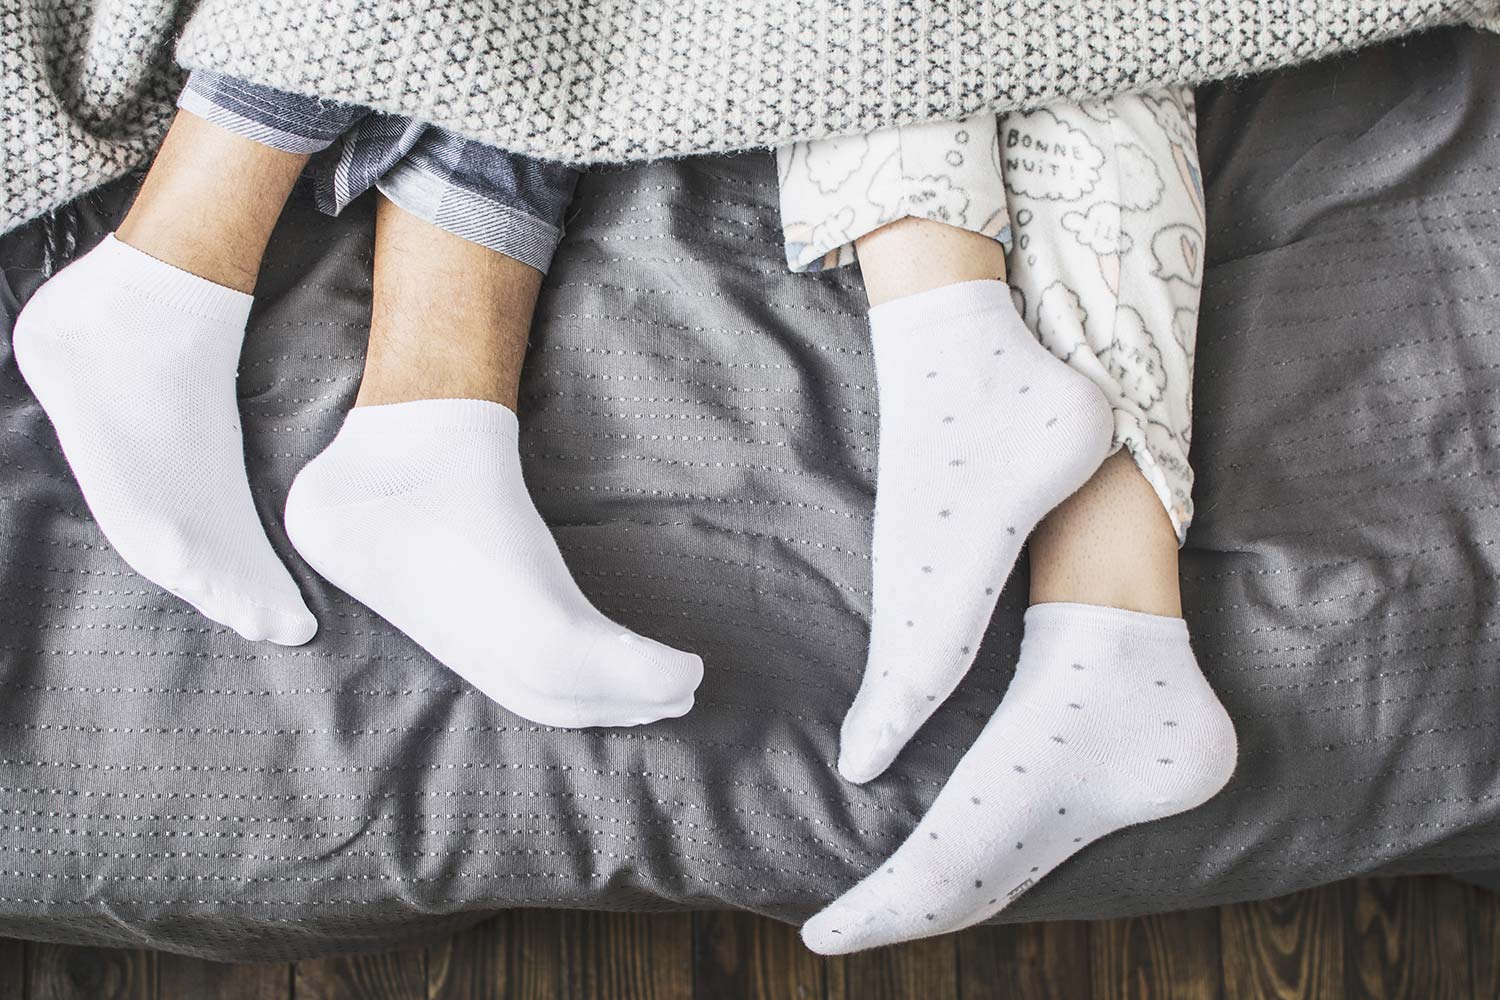 Wearing Socks To Bed Can Help You Sleep Better: Fact Or Fiction?